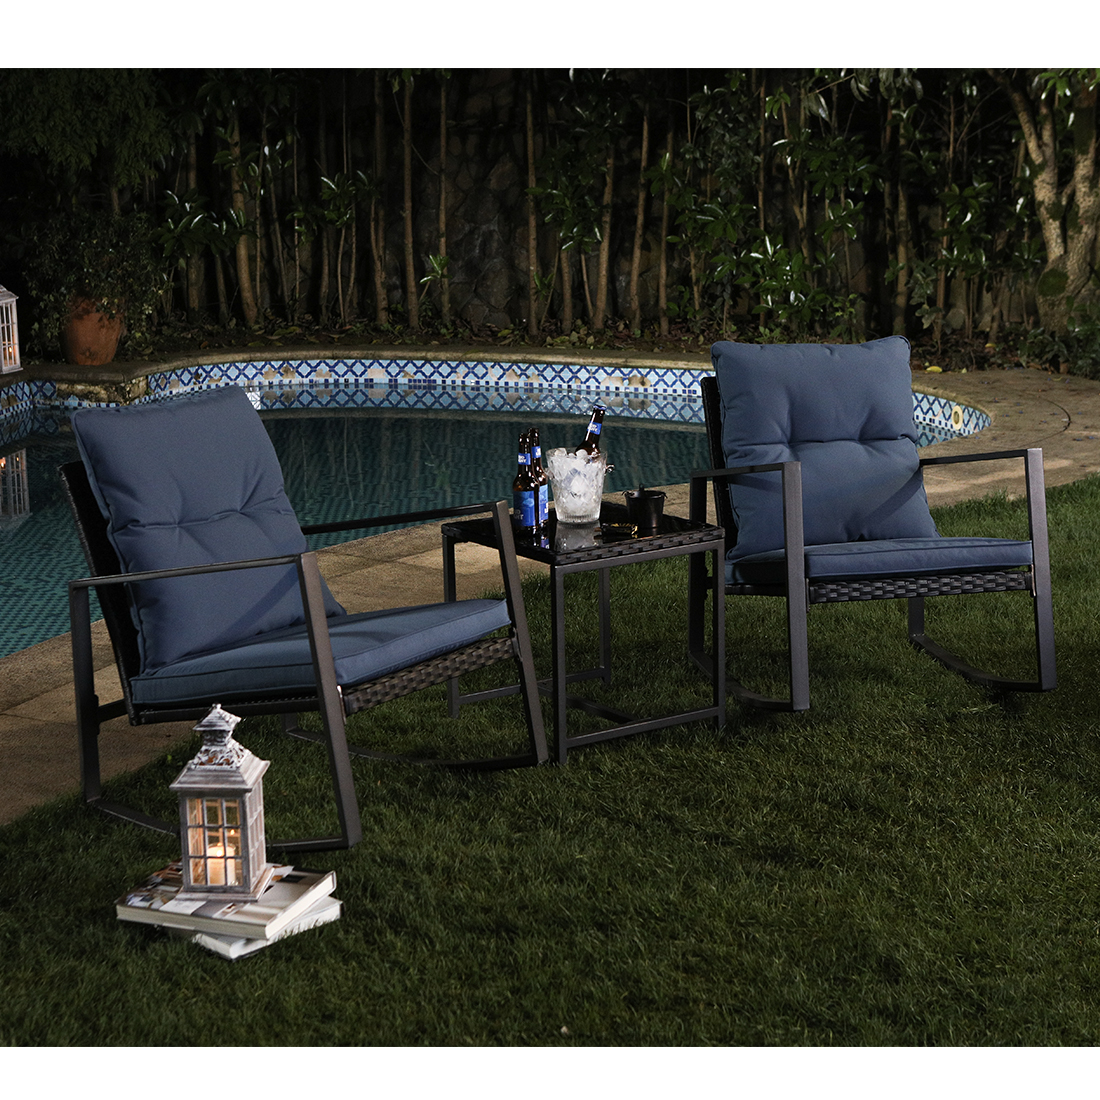 COSIEST Outdoor Bistro Rocking Chair Set with Blue Cushions, Steel Frame and Wicker Seat Base, Tempered Glass Top Coffee Table - image 4 of 13